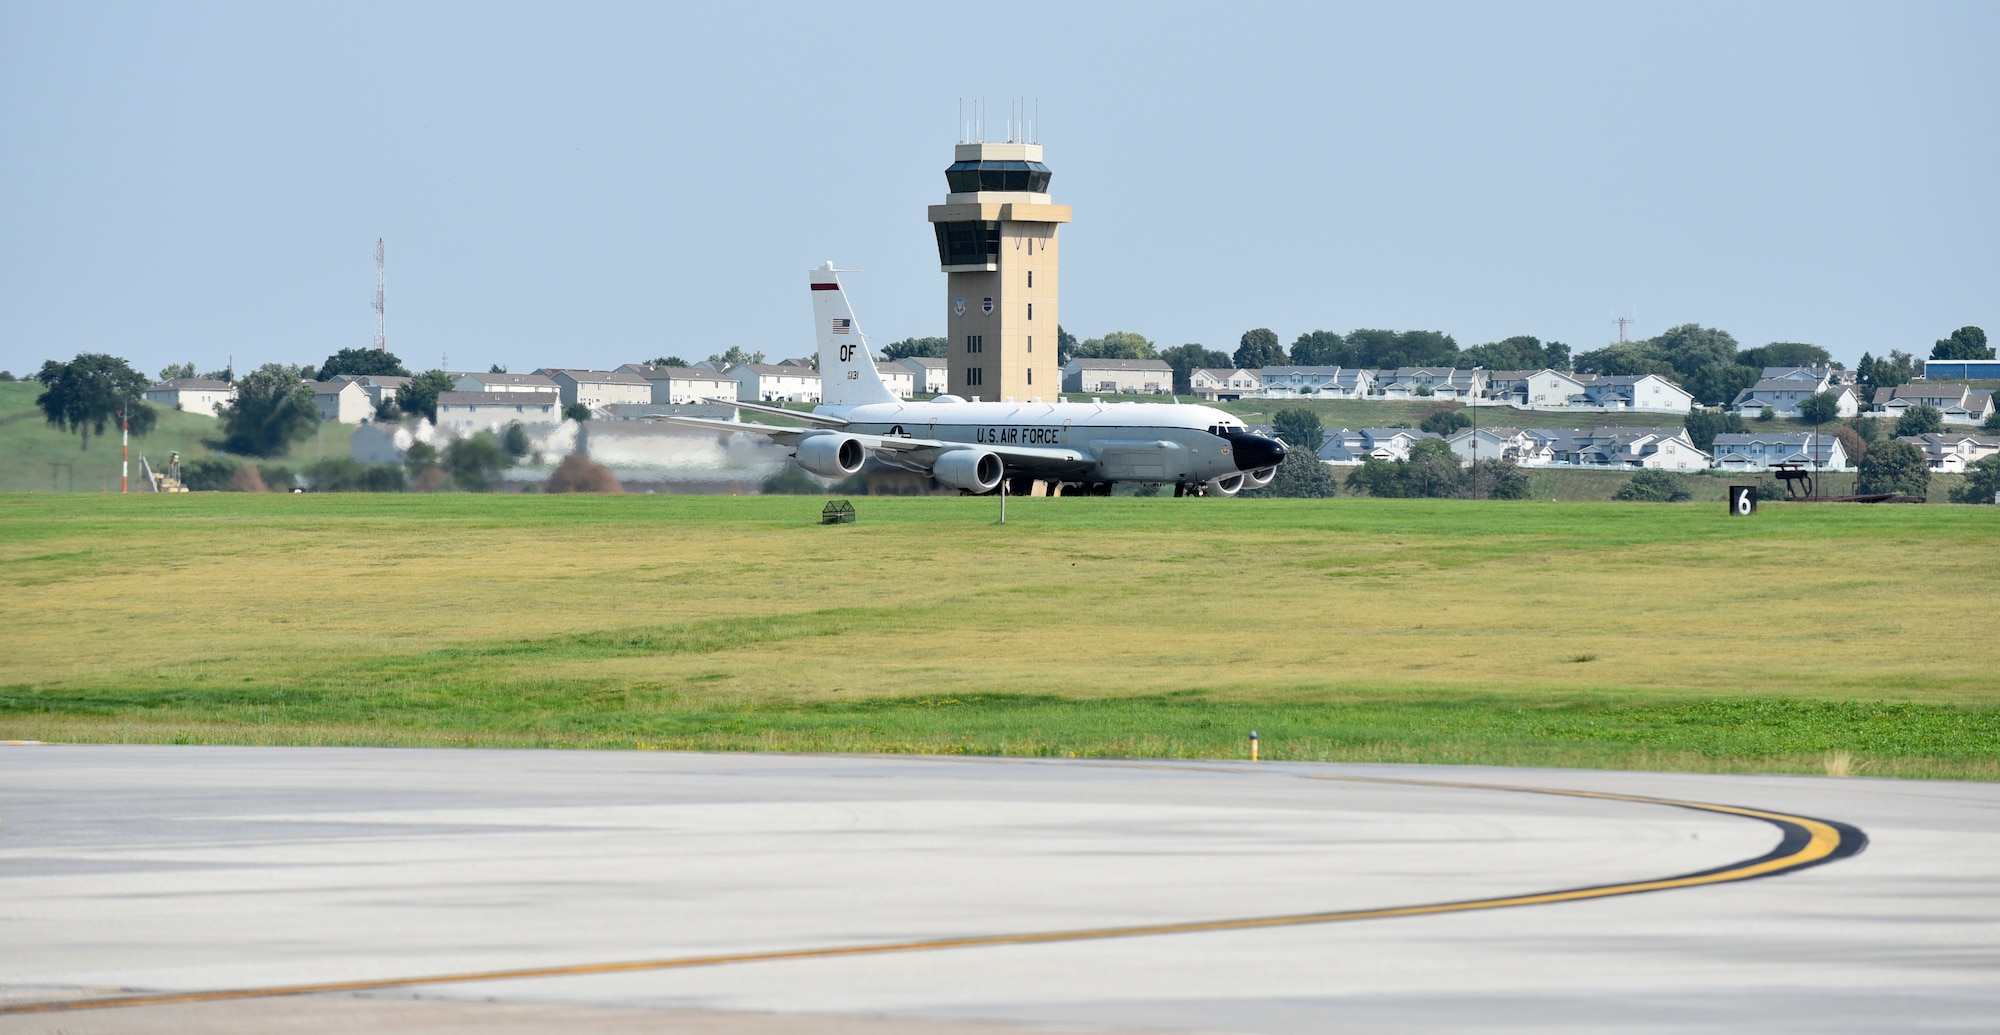 An Offutt-based RC-135V/W Rivet Joint accelerates during takeoff Aug. 5, 2018 at Offutt Air Force Base, Nebraska. The aircraft was flown during a unique training sortie with a flight and mission-crew comprised almost exclusively of reserve component Airmen. The aircraft is an extensively modified C-135. The Rivet Joint's modifications are primarily related to its on-board sensor suite, which allows the mission-crew to detect, identify and geolocate signals throughout the electromagnetic spectrum. The mission crew can then forward gathered information in a variety of formats to a wide range of consumers via Rivet Joint's extensive communications suite. (U.S. Air Force photo by 2nd Lt. Drew Nystrom)